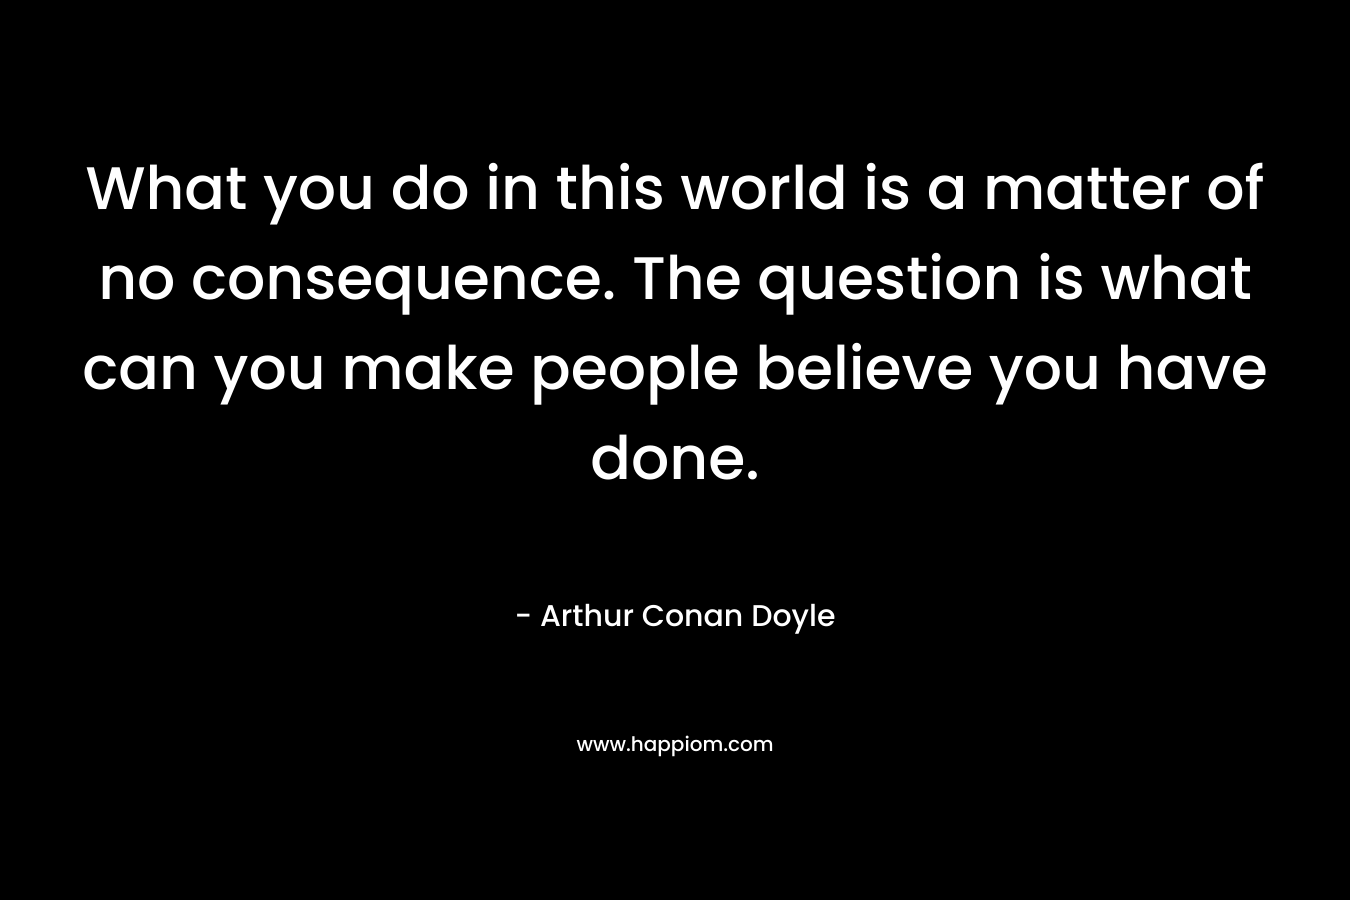 What you do in this world is a matter of no consequence. The question is what can you make people believe you have done.